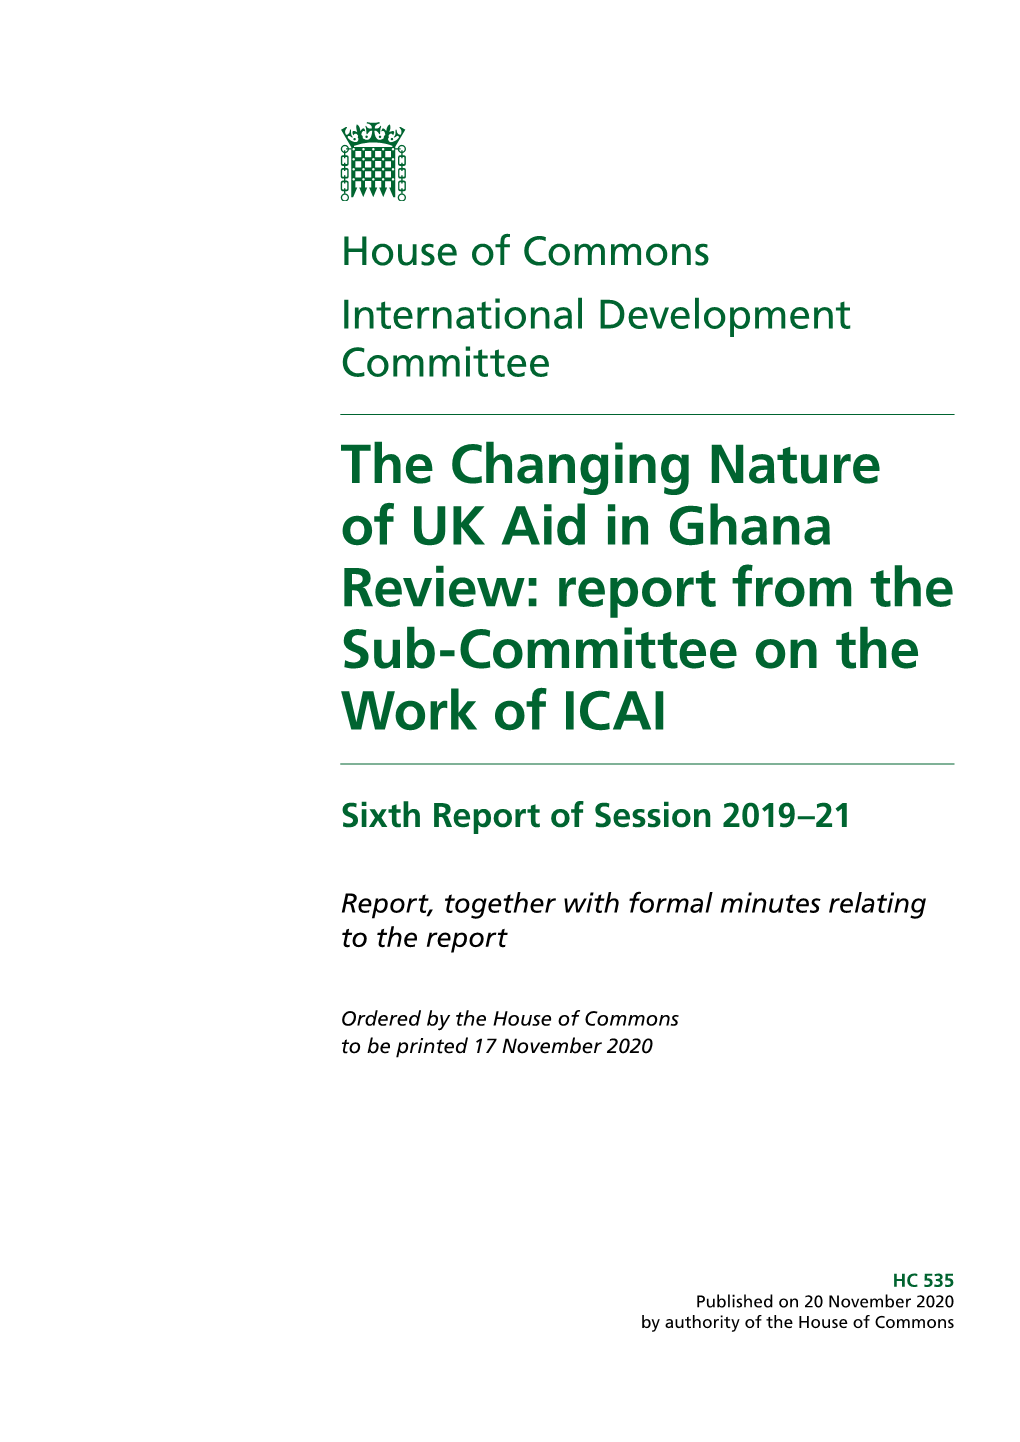 ICAI's Review on the Changing Nature of UK Aid in Ghana